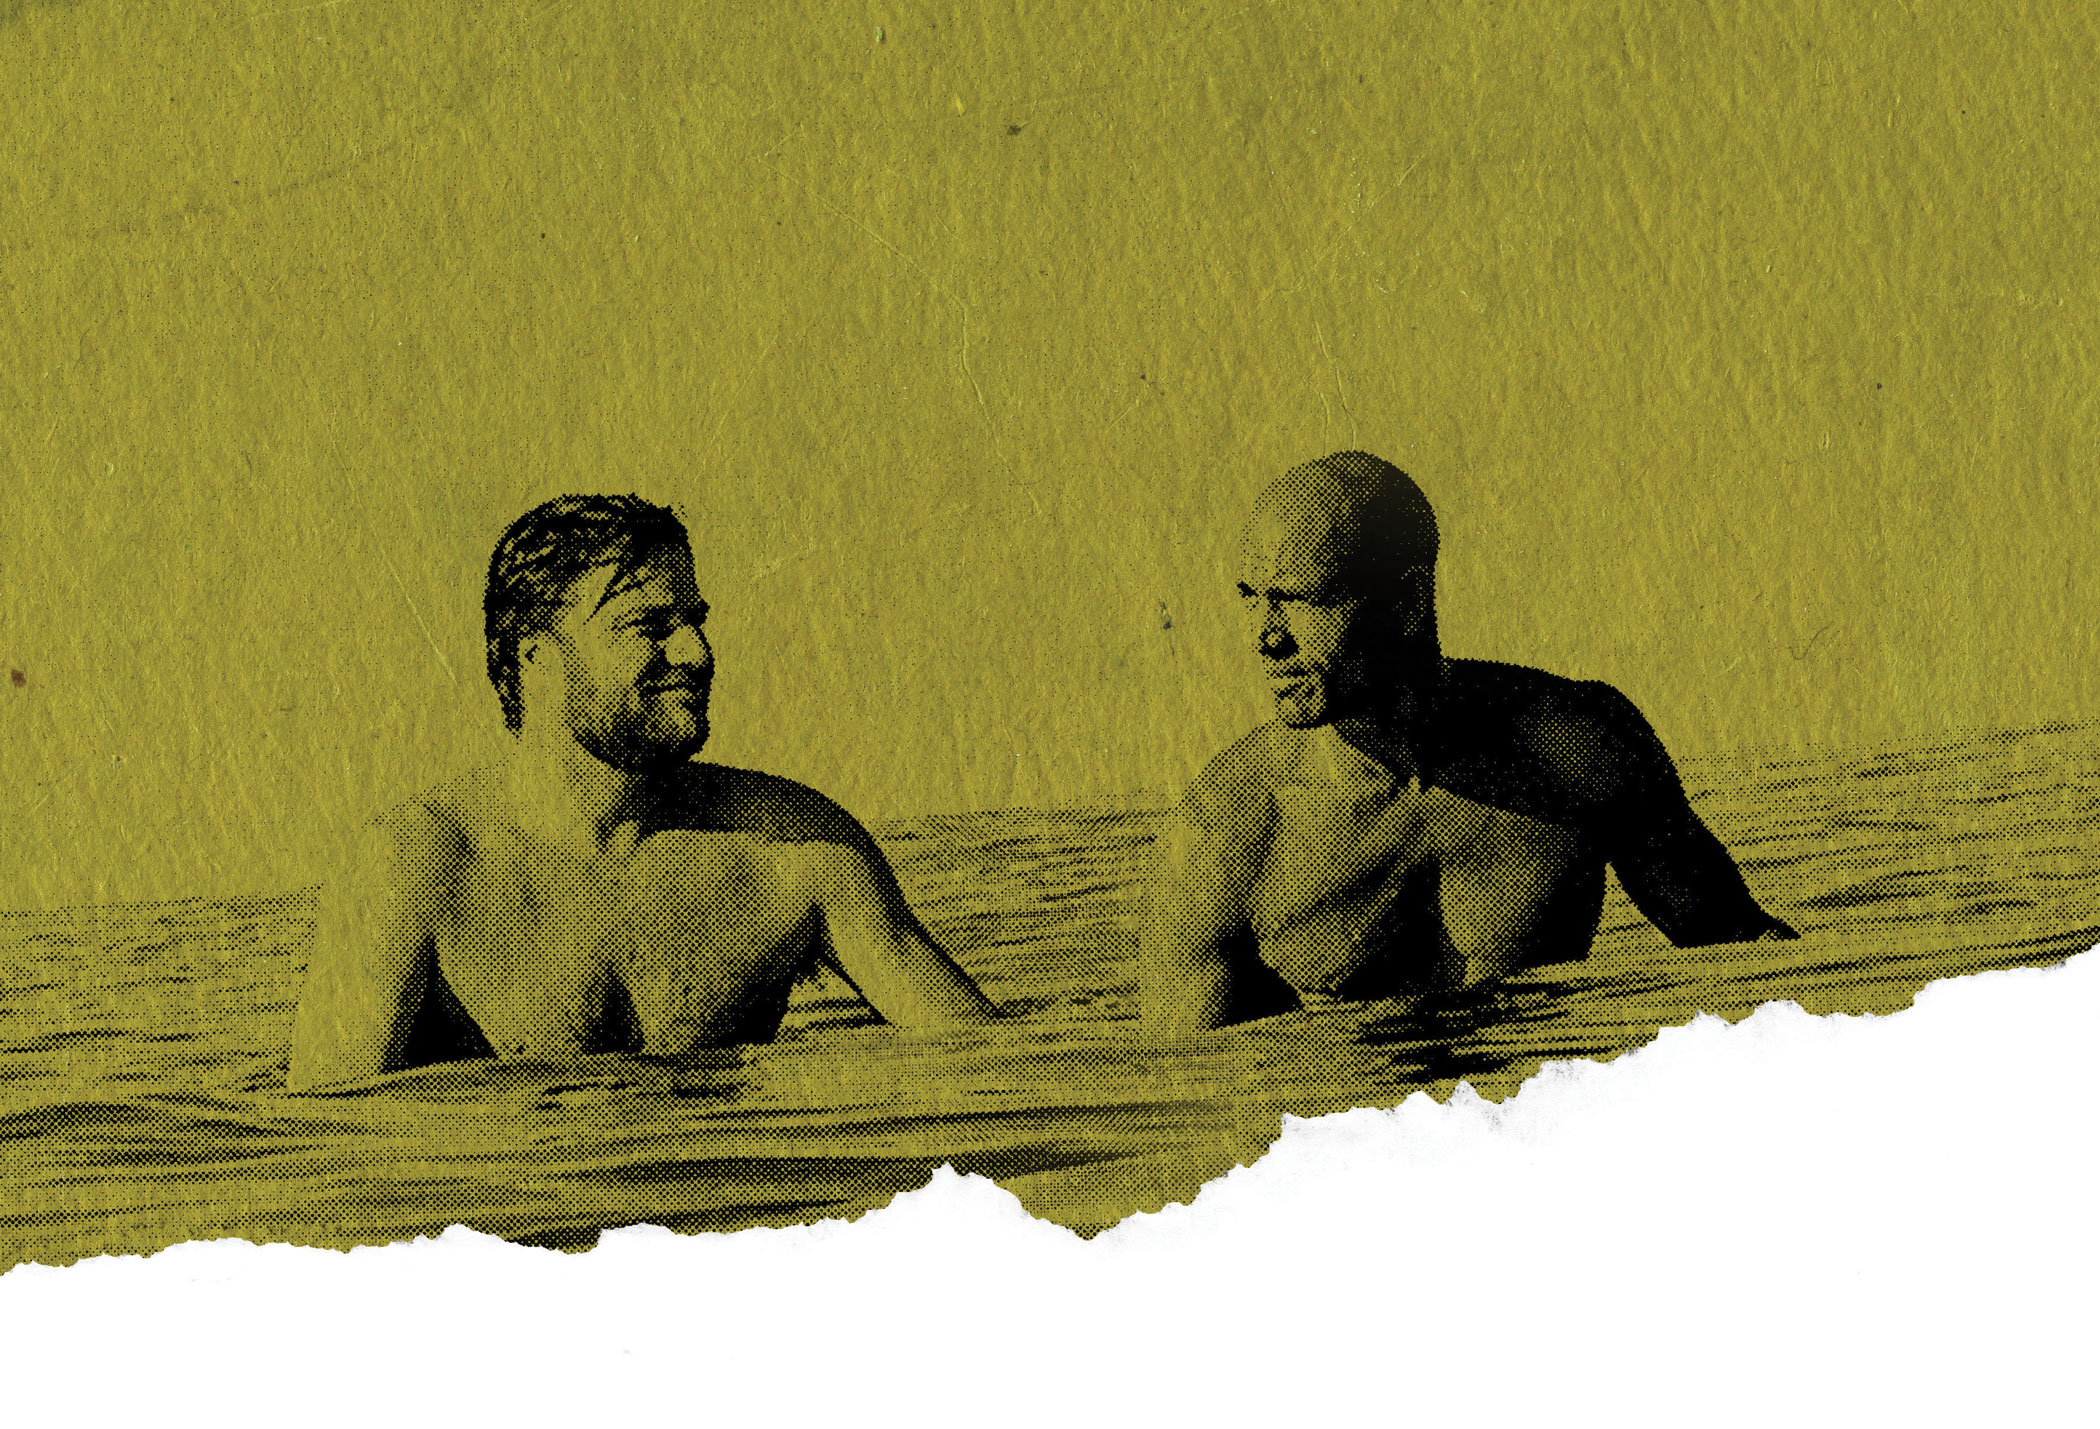 The Surf Issue: Interview between Benji Weatherley and Surf Pro Kelly Slater